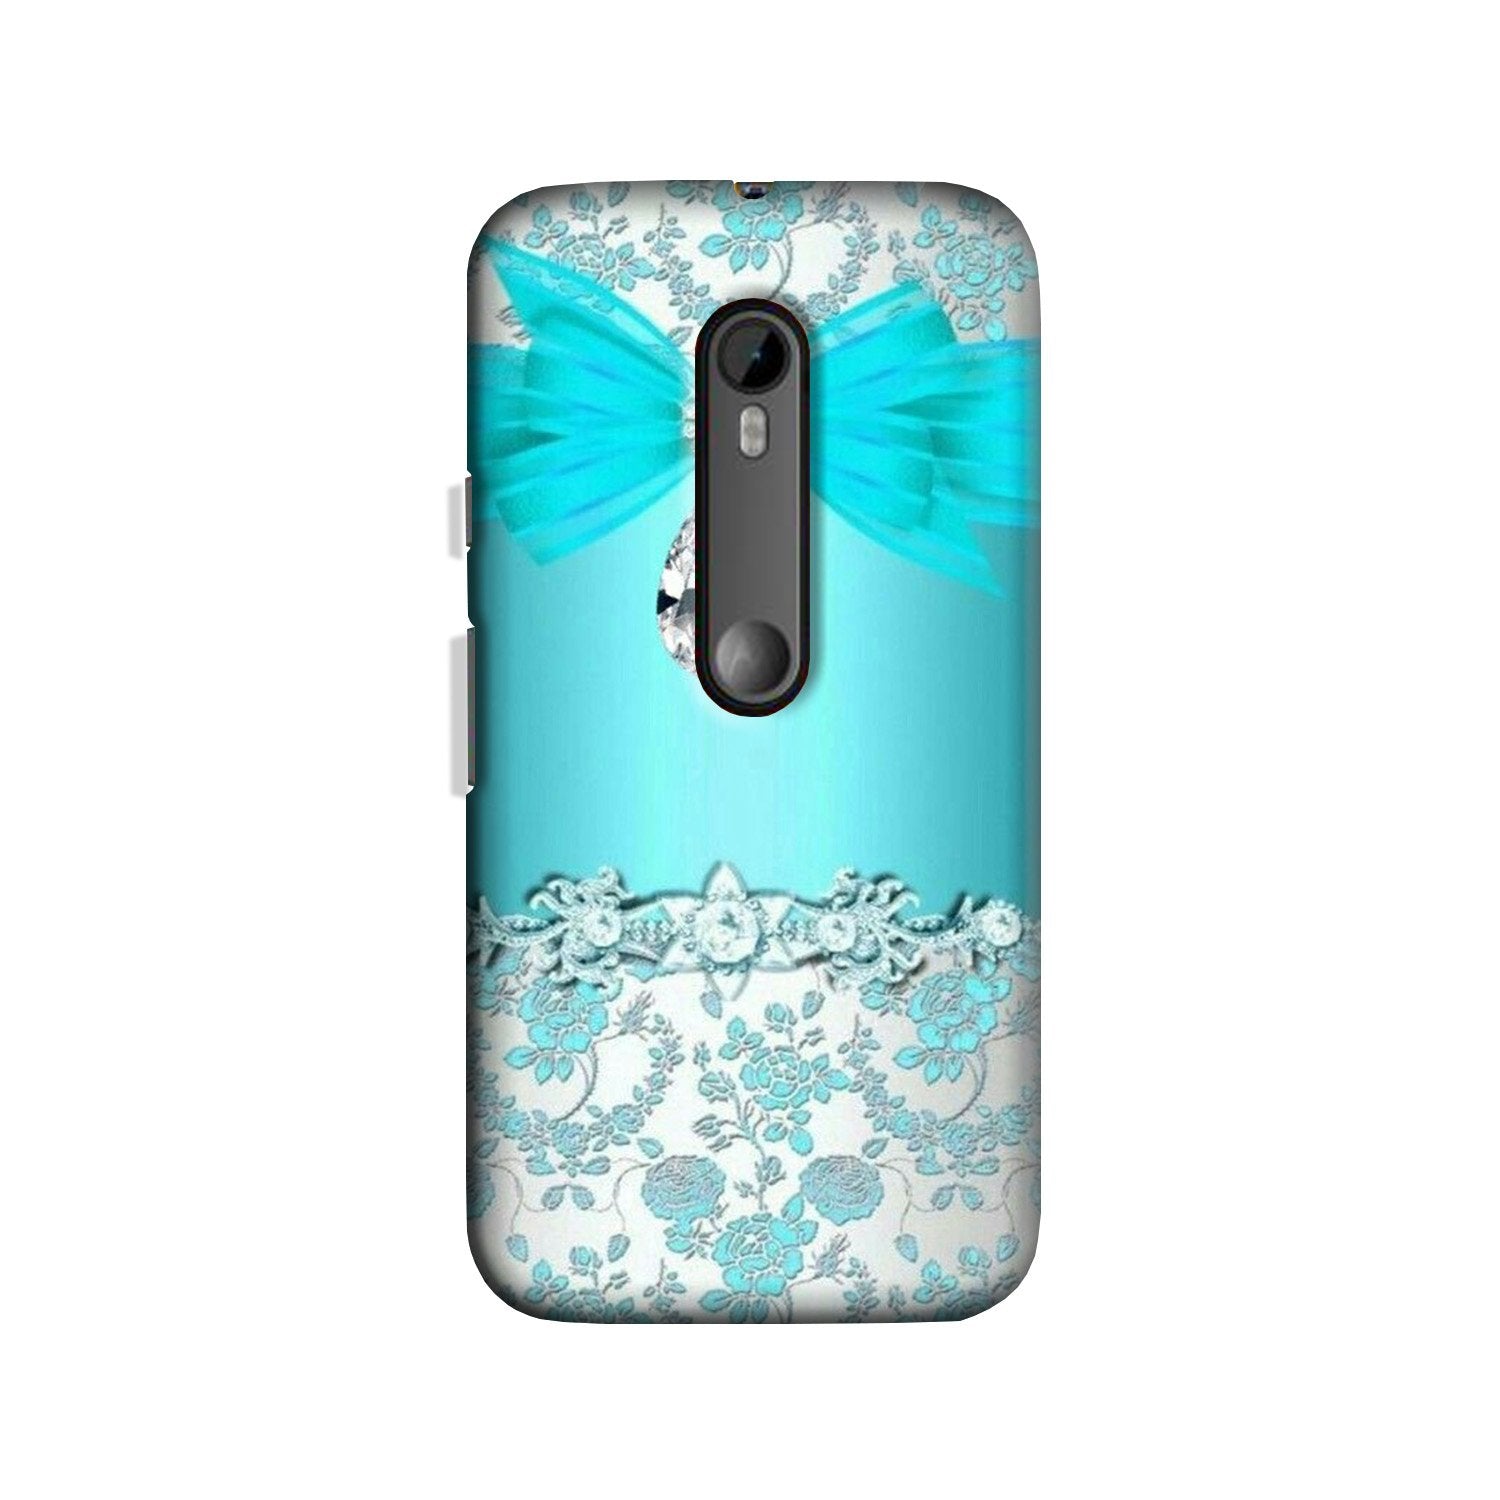 Shinny Blue Background Case for Moto X Play